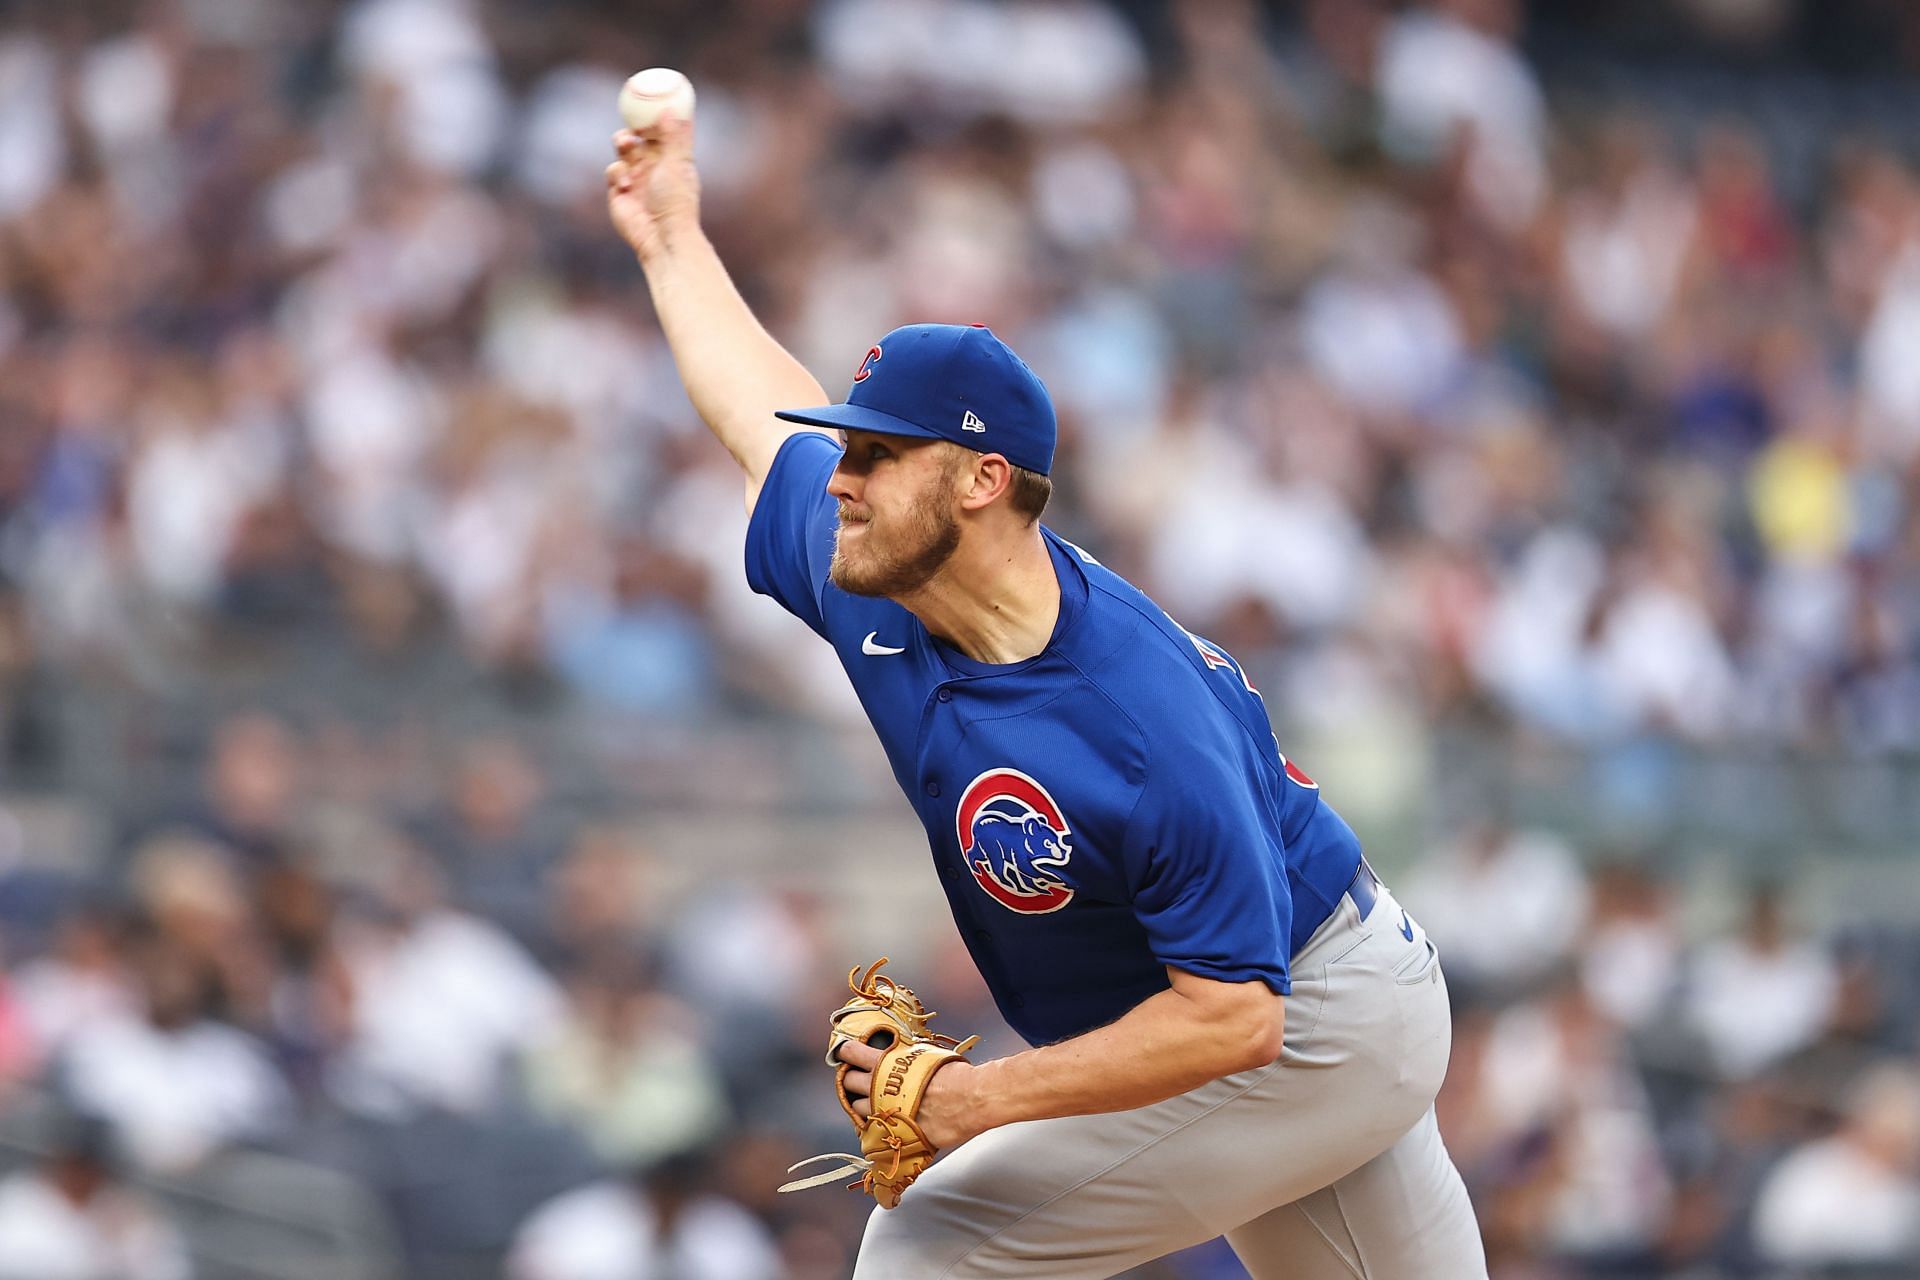 The Chicago Cubs earned their first win at Yankee Stadium